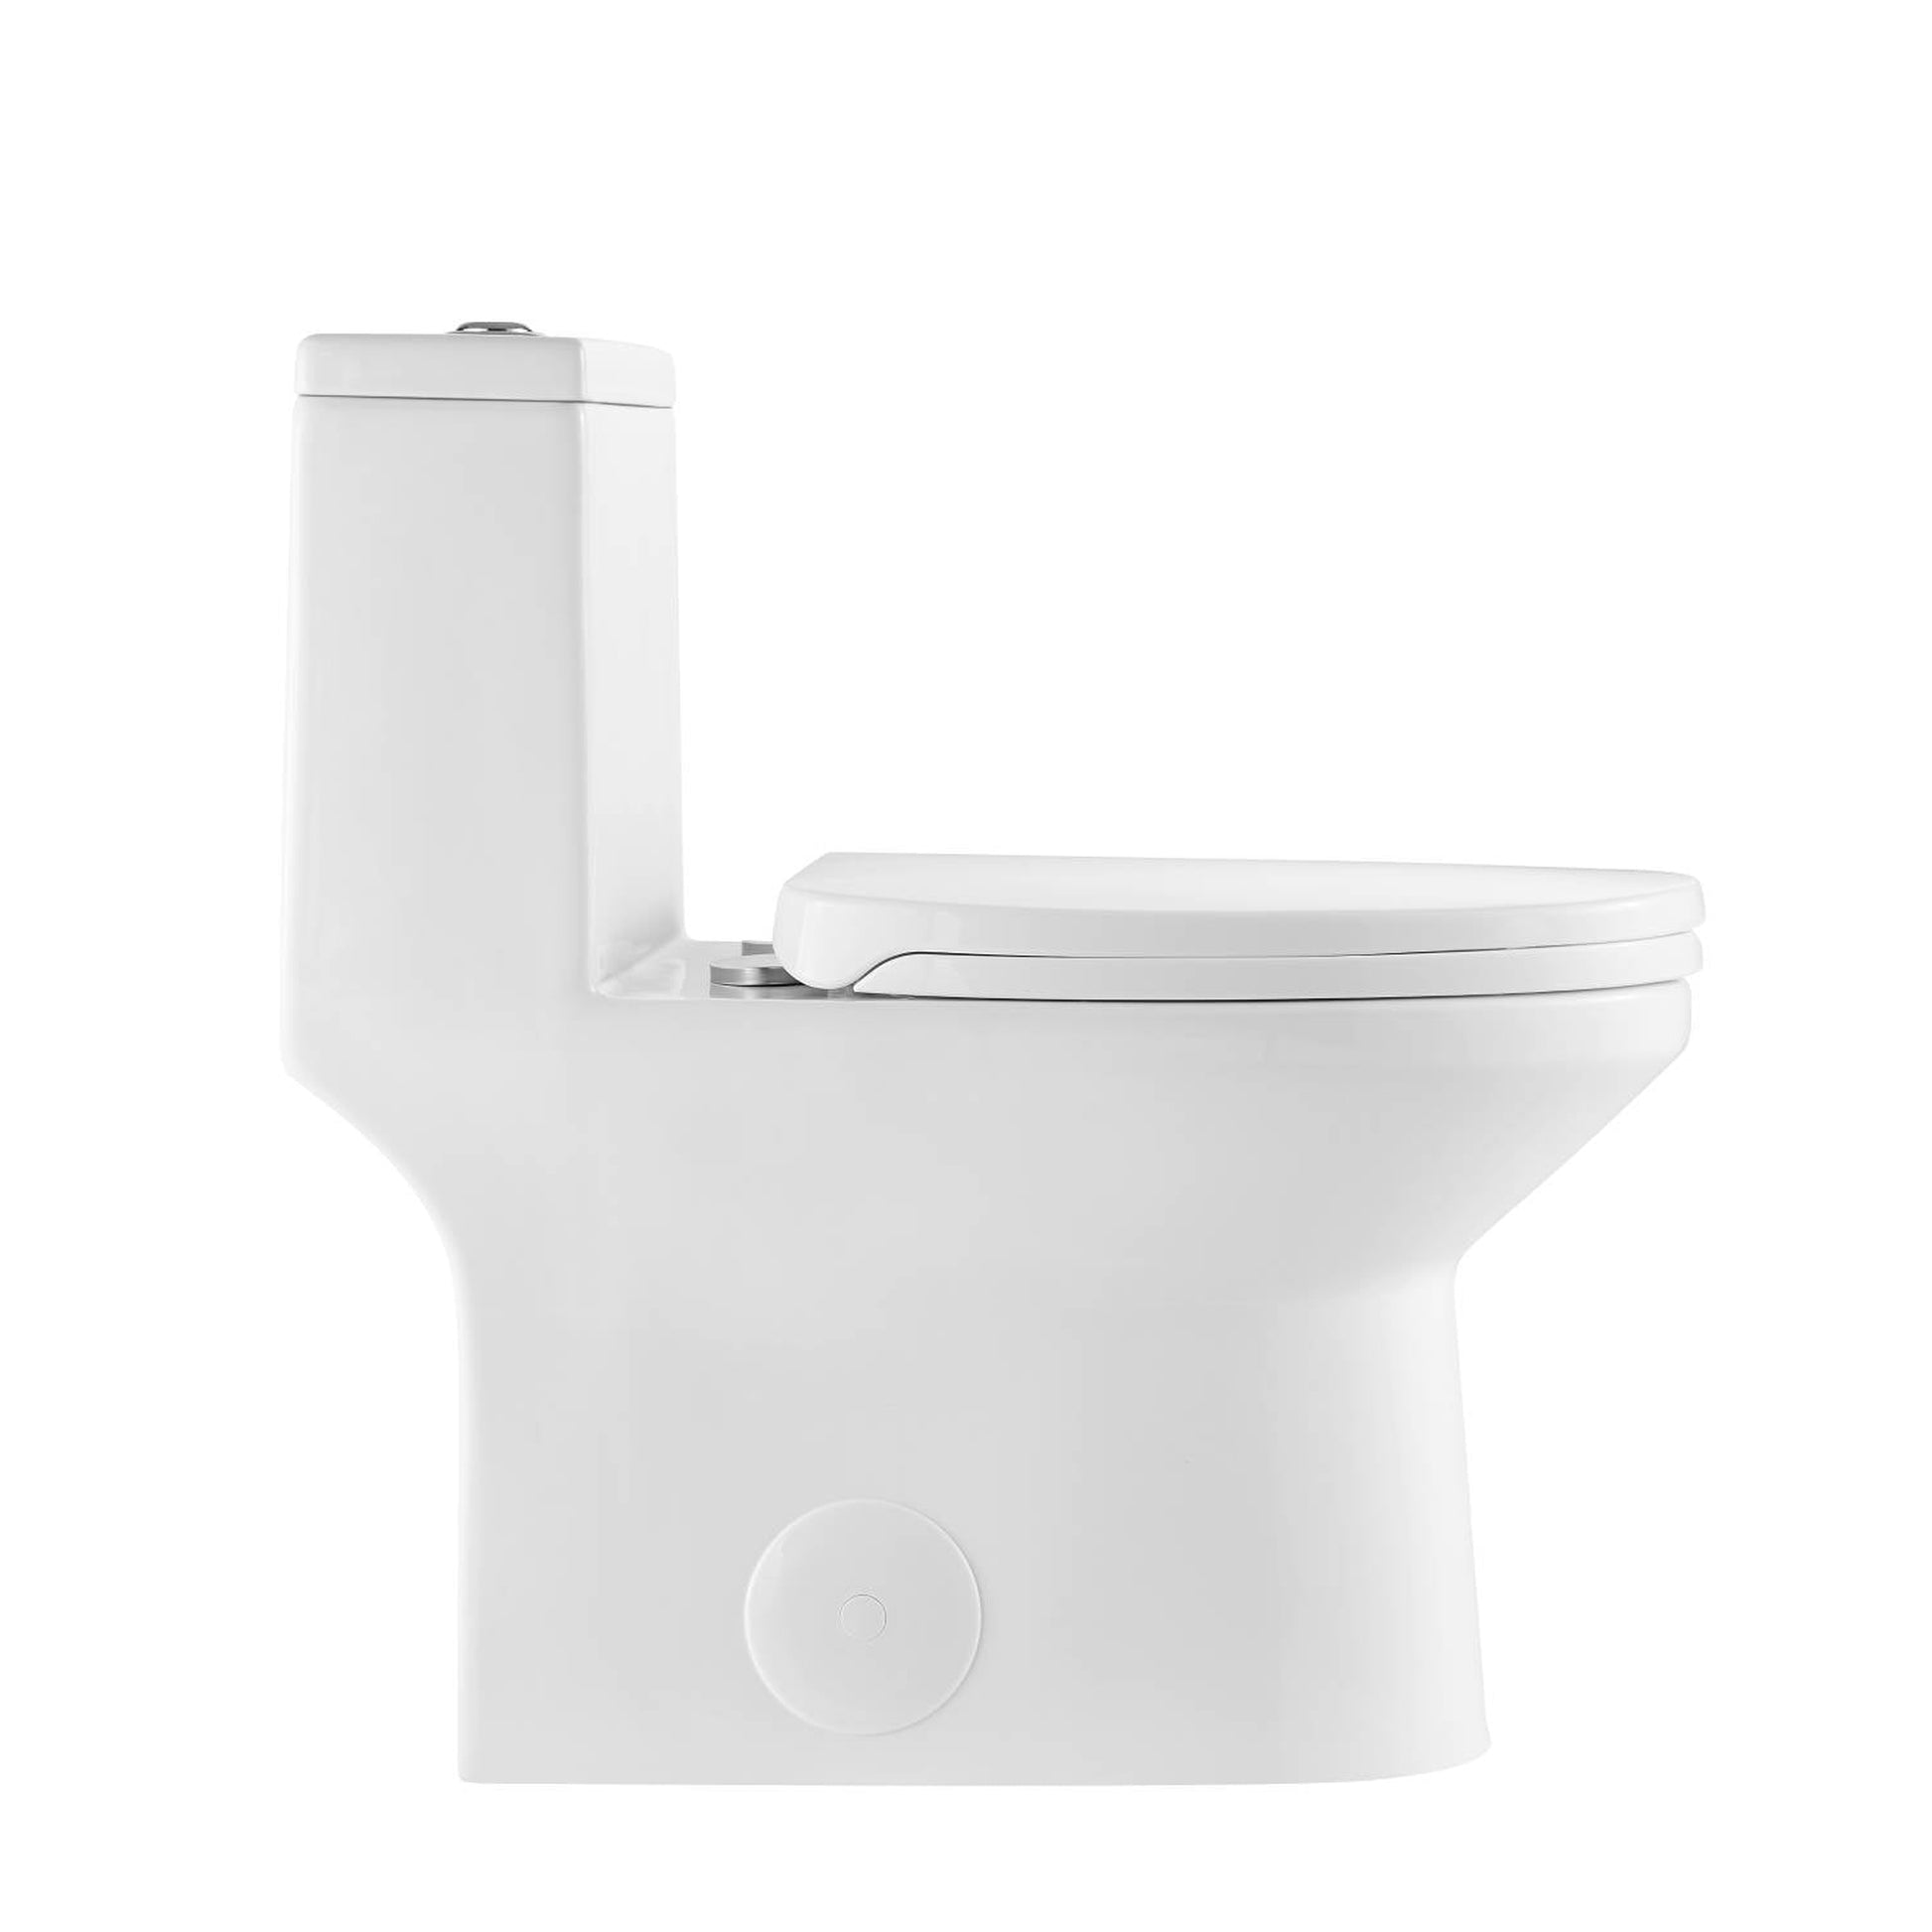 Blossom T9 04 1.1 / 1.6 GPF Dual Flush White ADA One Piece Toilet With Slow-closing Seat Cover